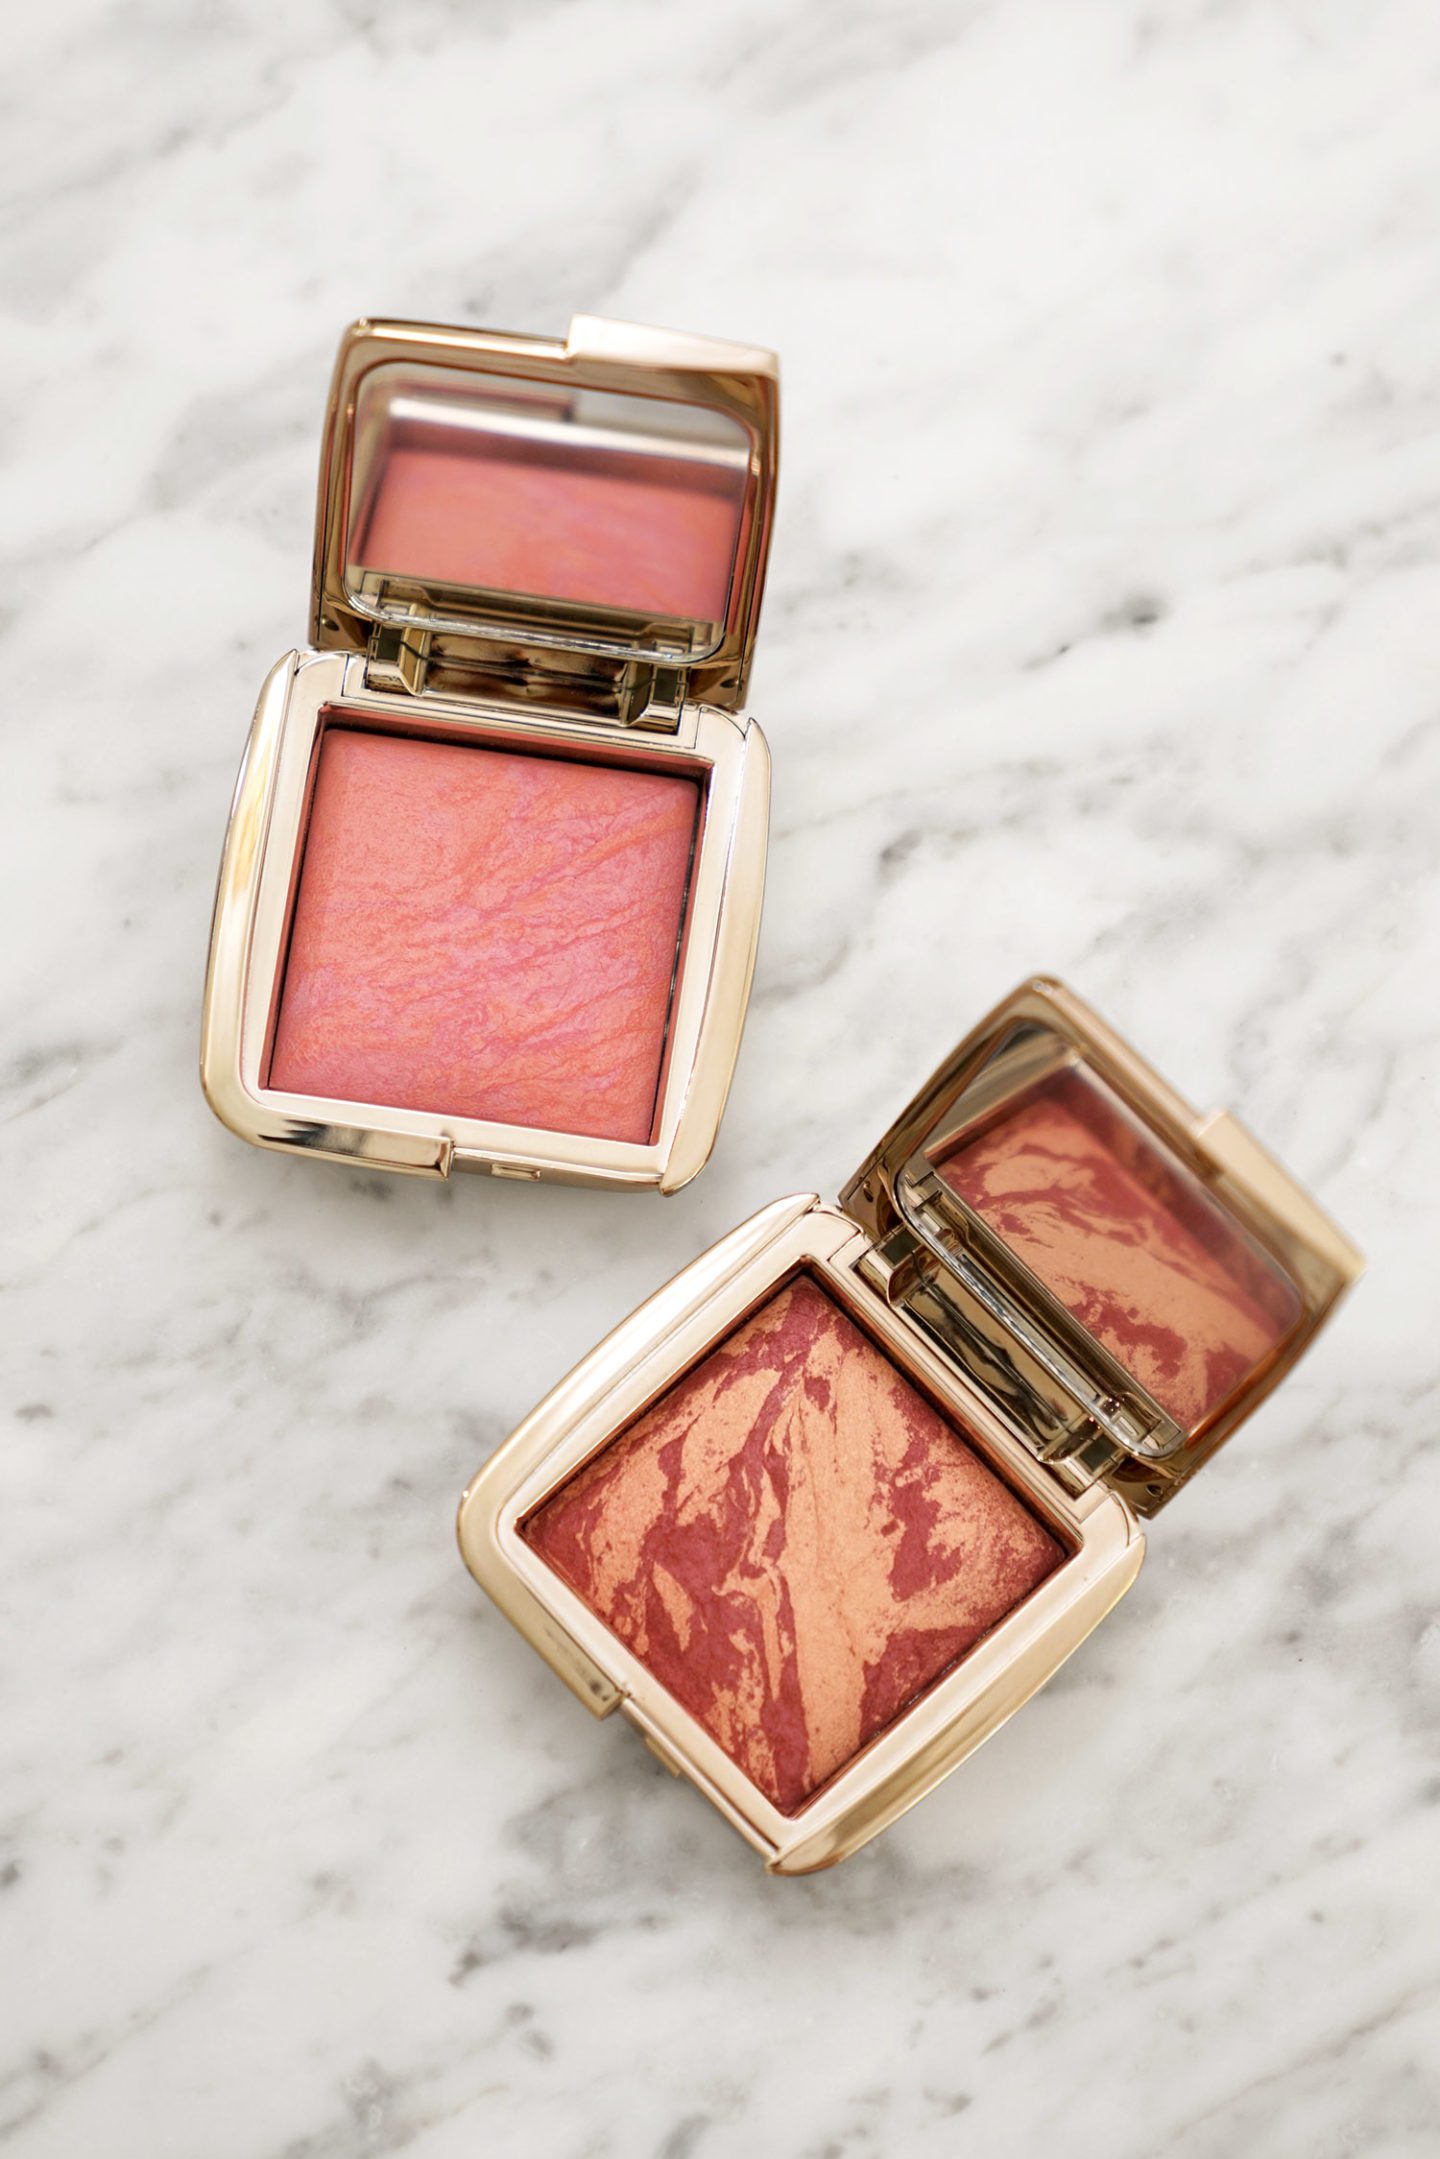 Hourglass Ambient Lighting Blushes in Sublime Flush and At Night